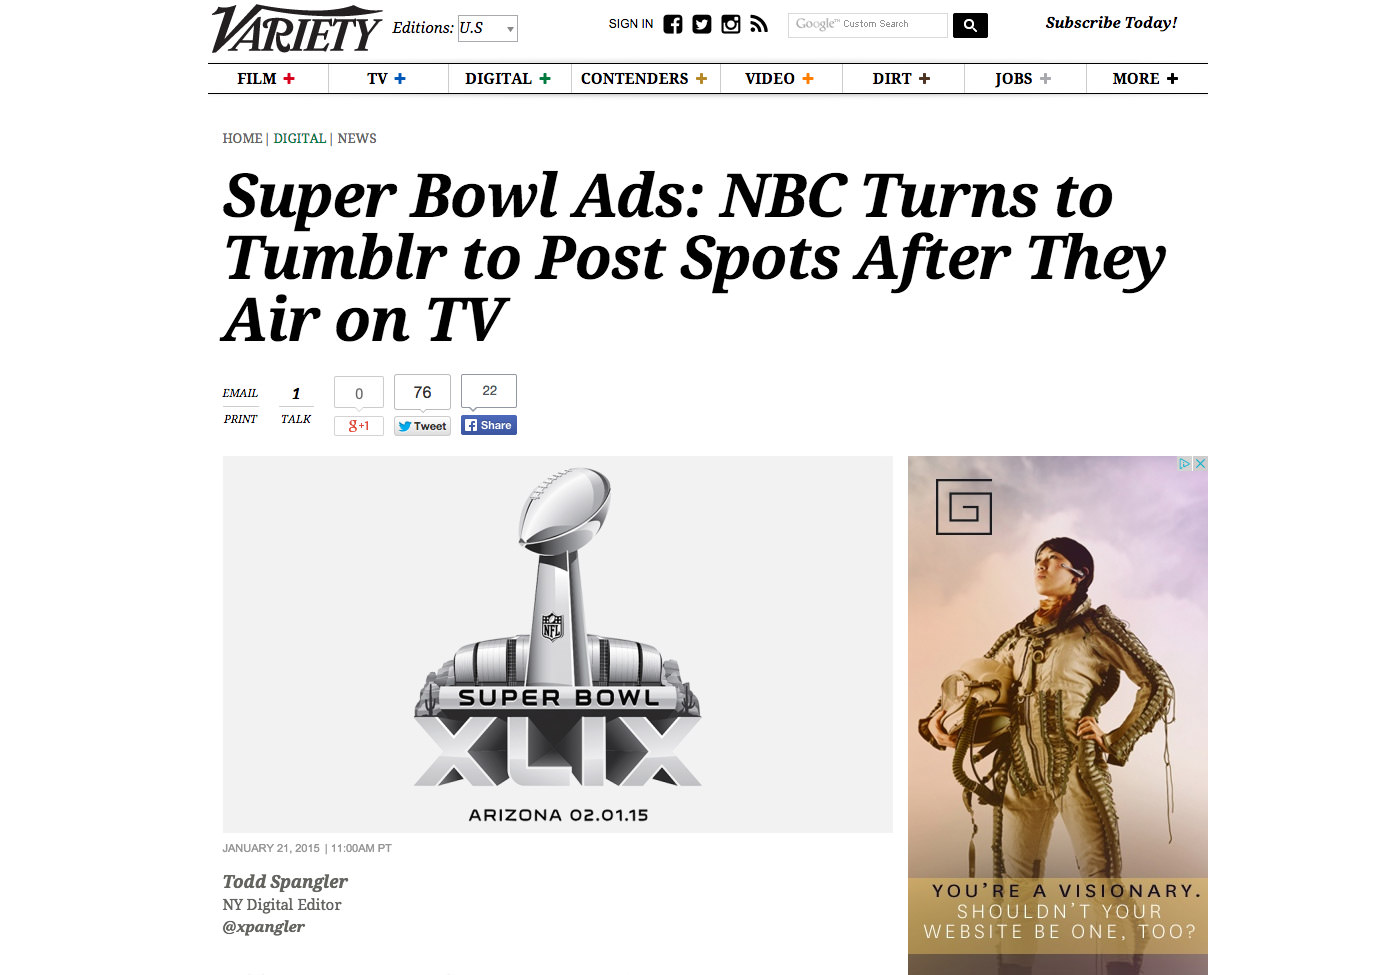 Variety coverage of the NBC Sports Super Bowl site: "Super Bowl Ads: NBC Turns to Tumblr to Post Spots After They Air on TV"